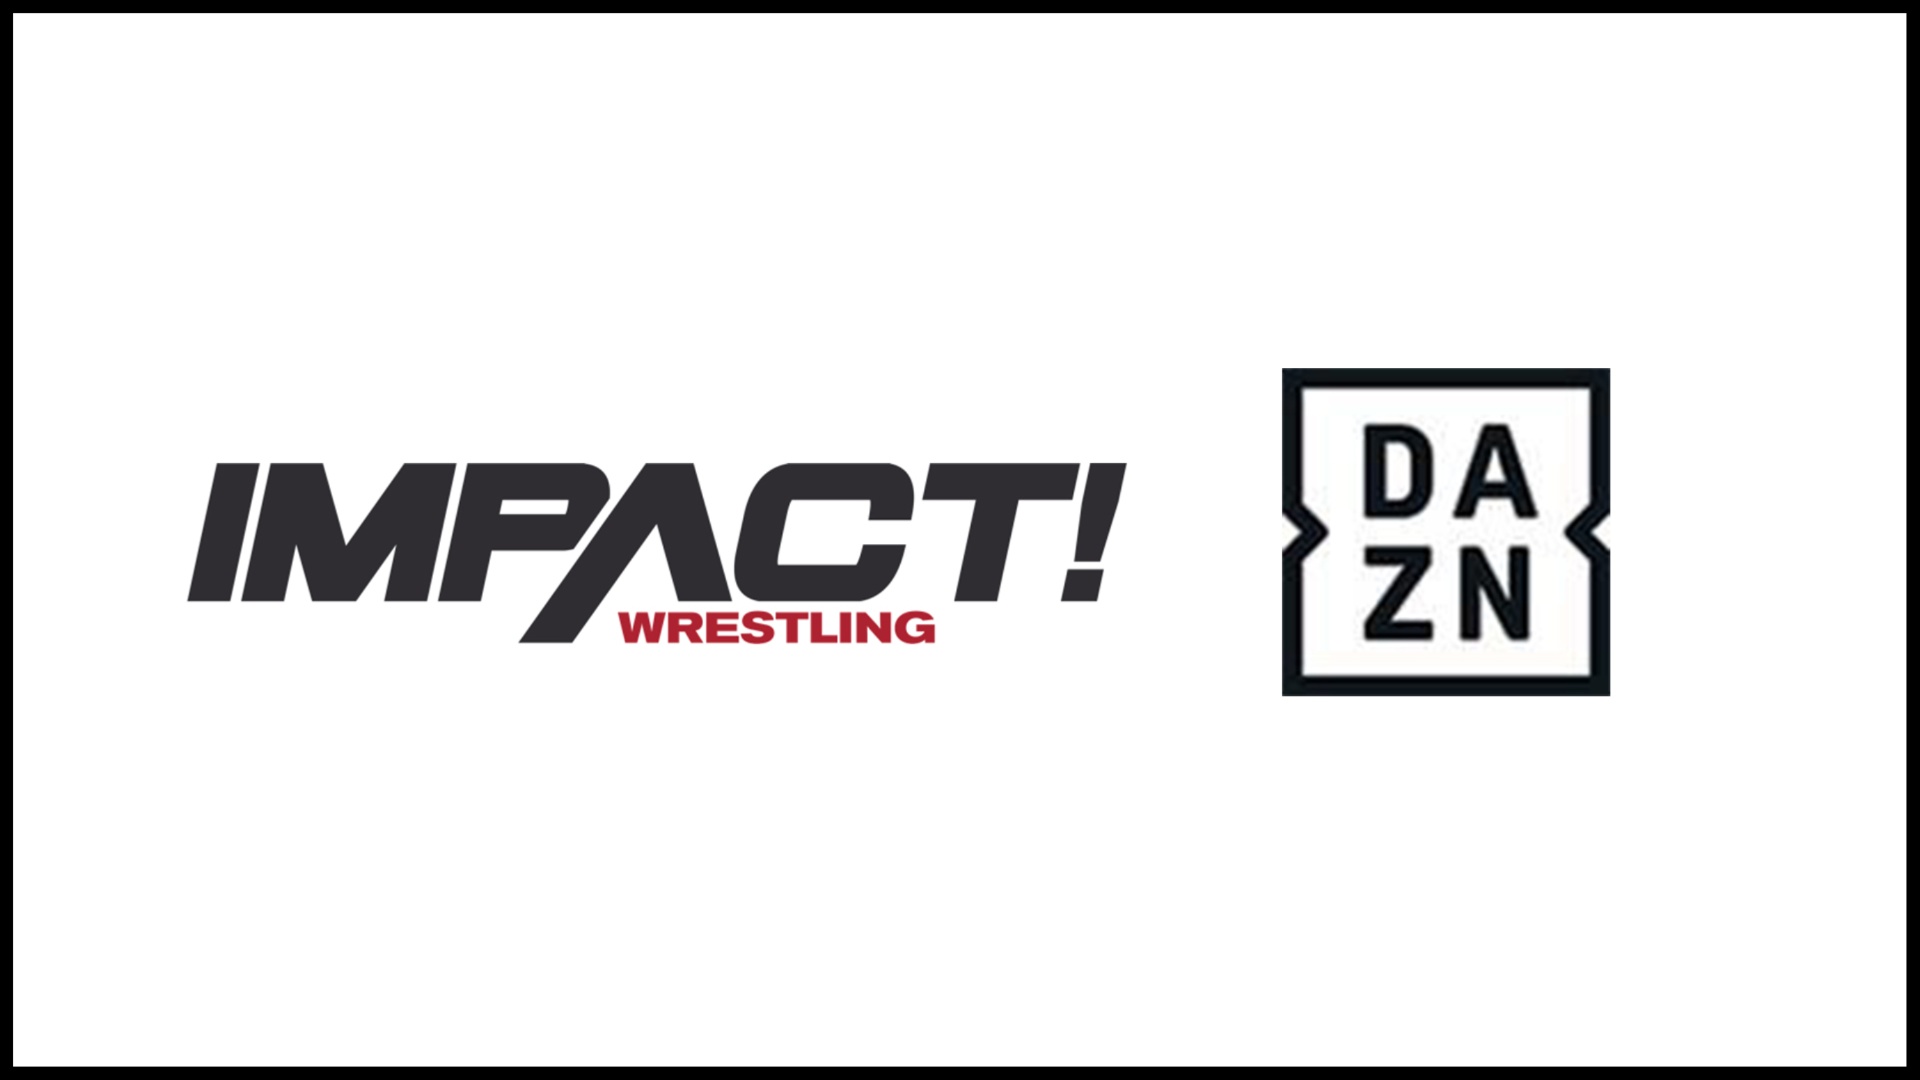 IMPACT WRESTLING NOW ON SKY TV IN THE UK AND IRELAND VIA DAZN 1 HD